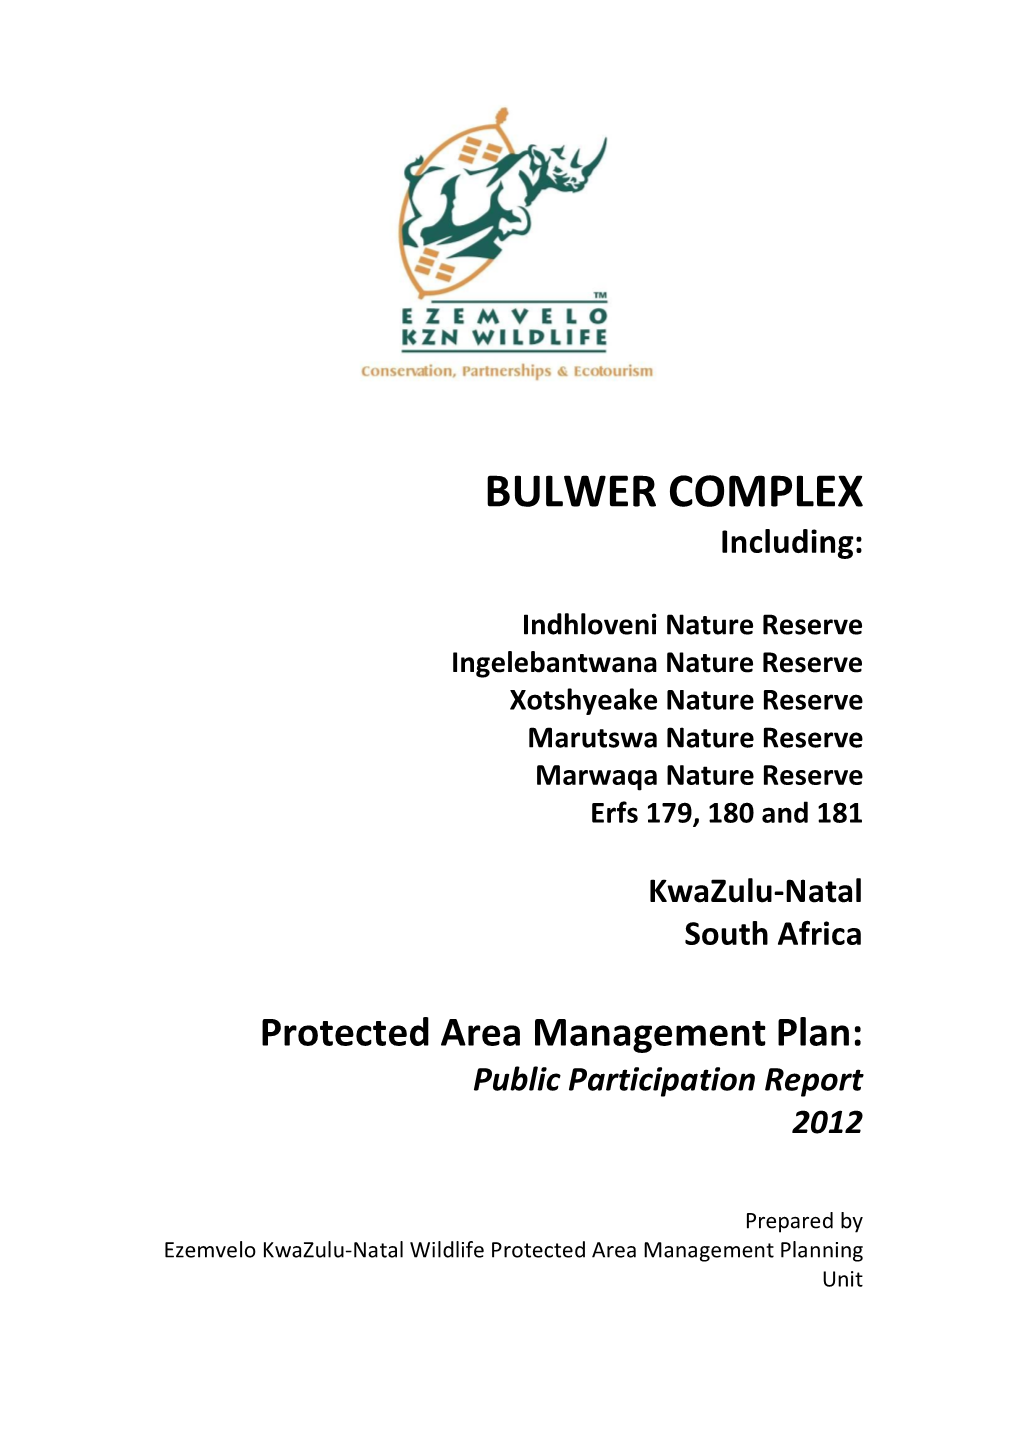 BULWER COMPLEX Including